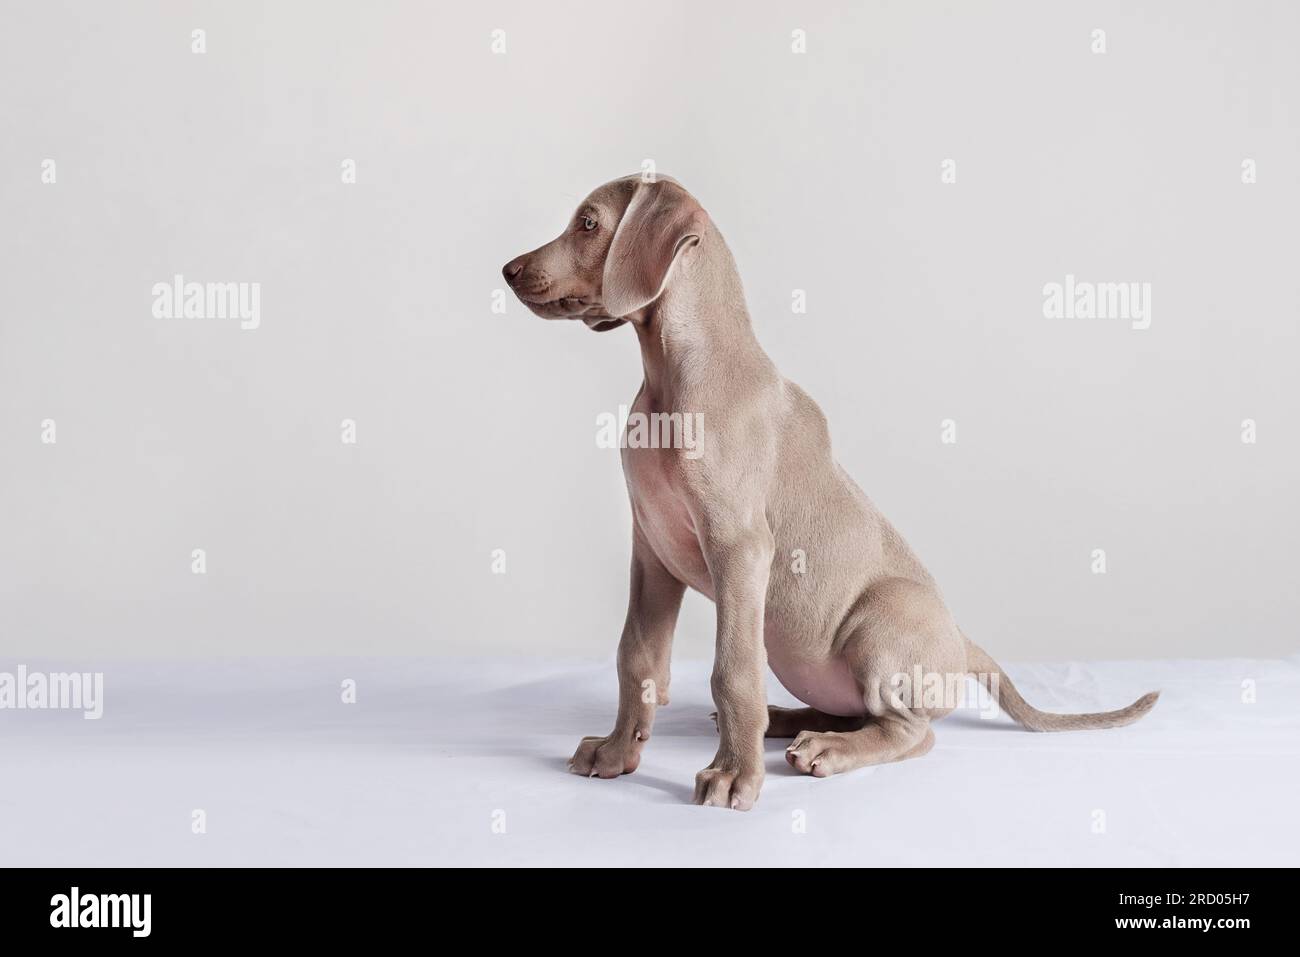 Weimaraner puppy sitting and looking to the side. Pedigree dogs Stock Photo